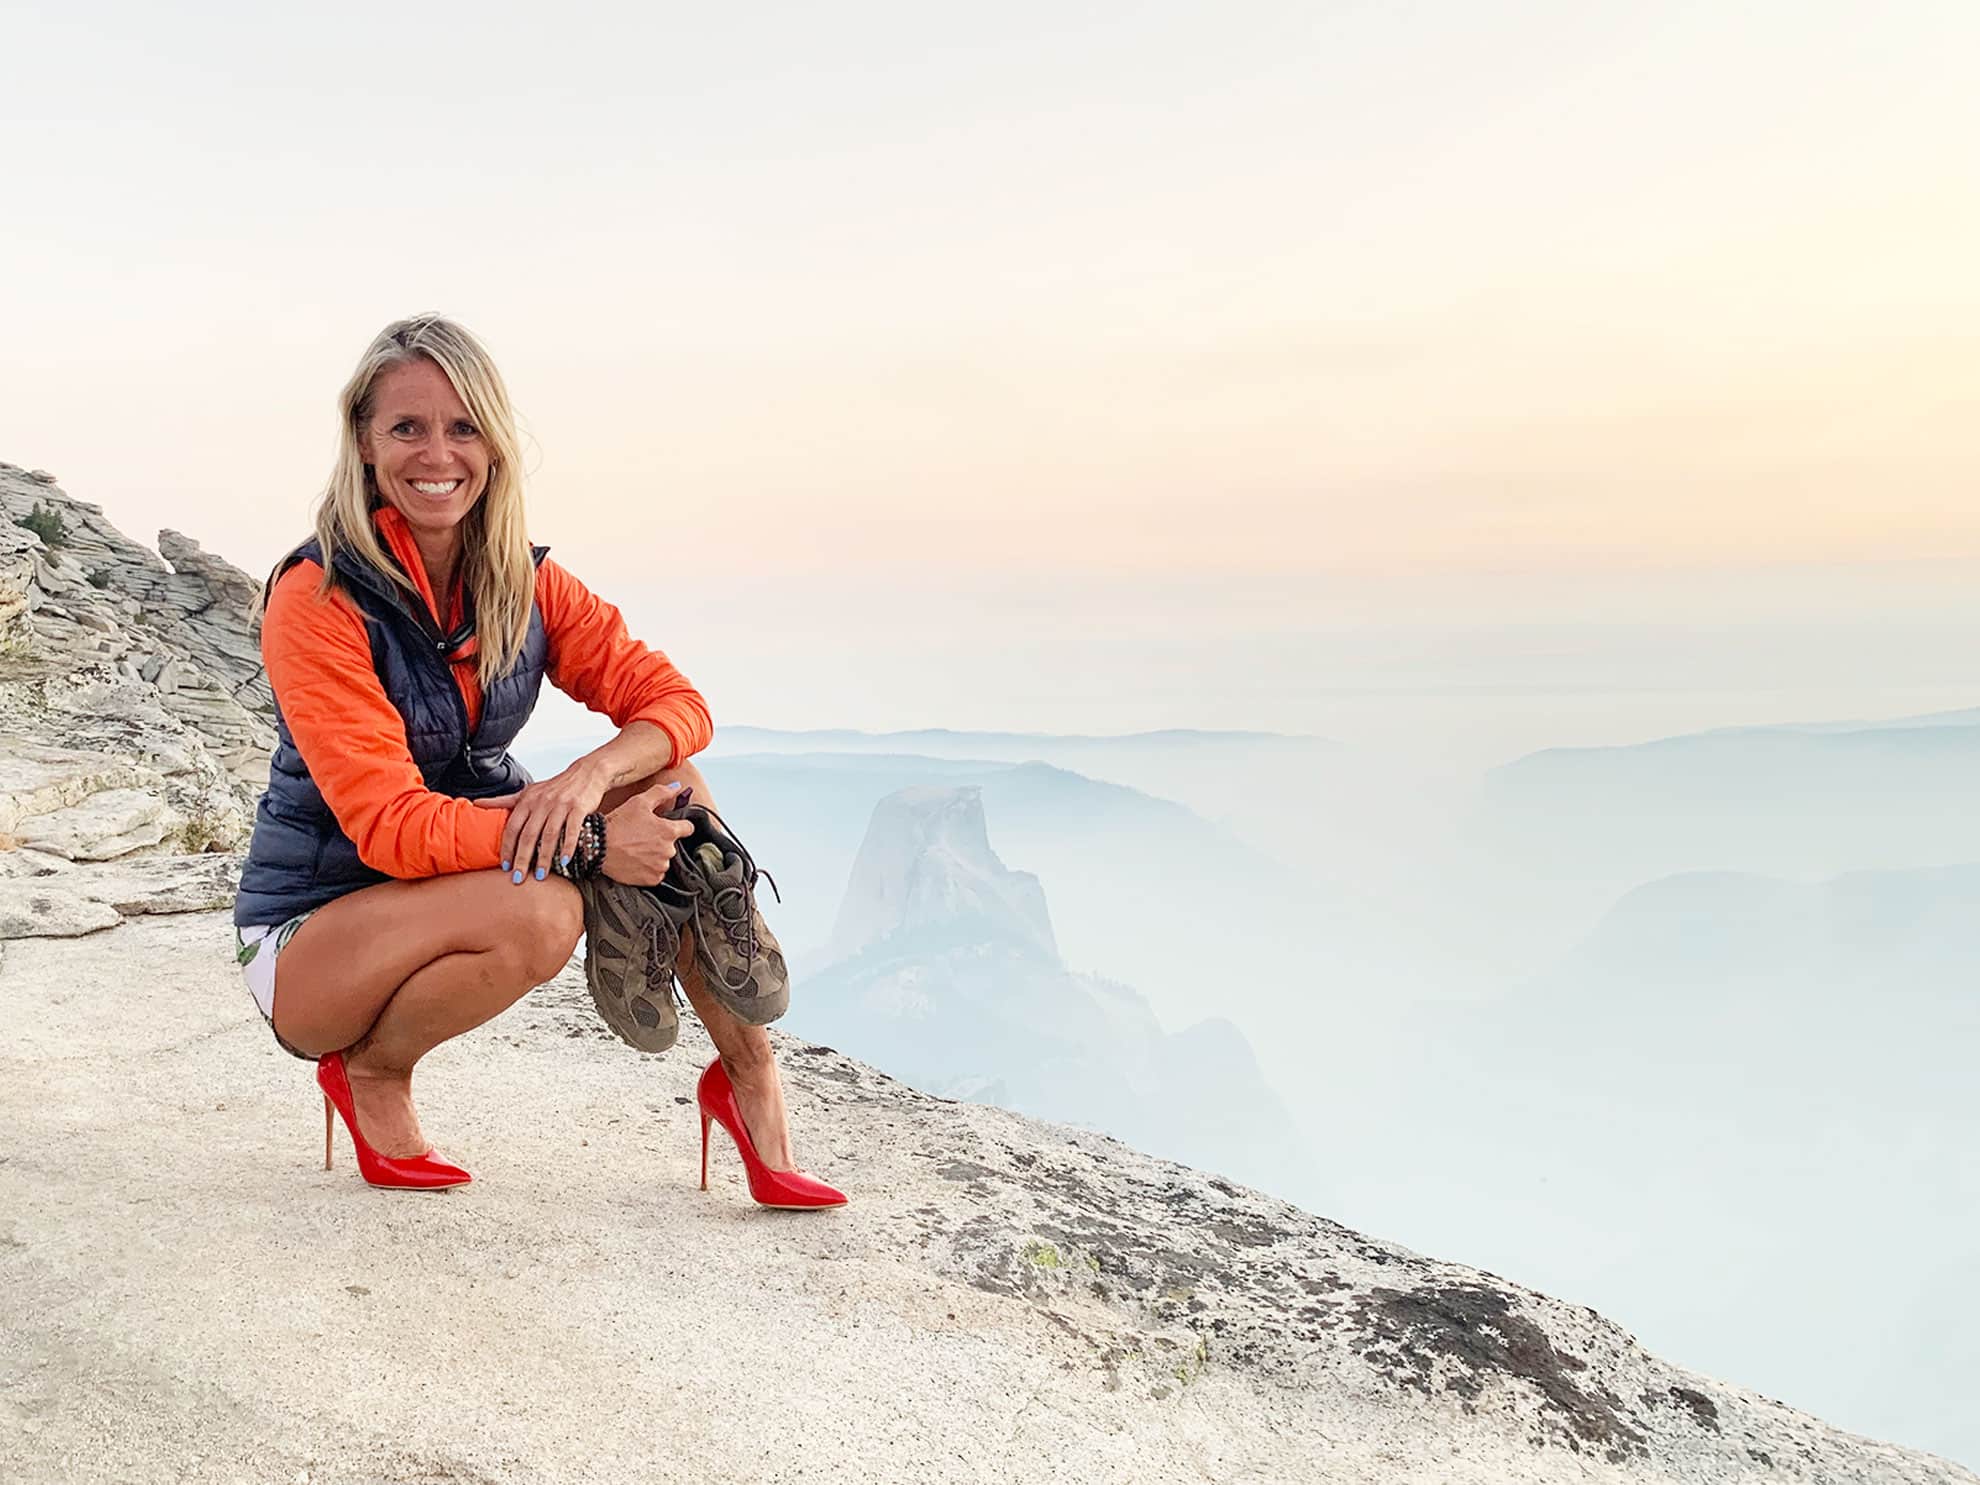 Why do you carry red heels in the backcountry? Article written by Sara Schulting Kranz